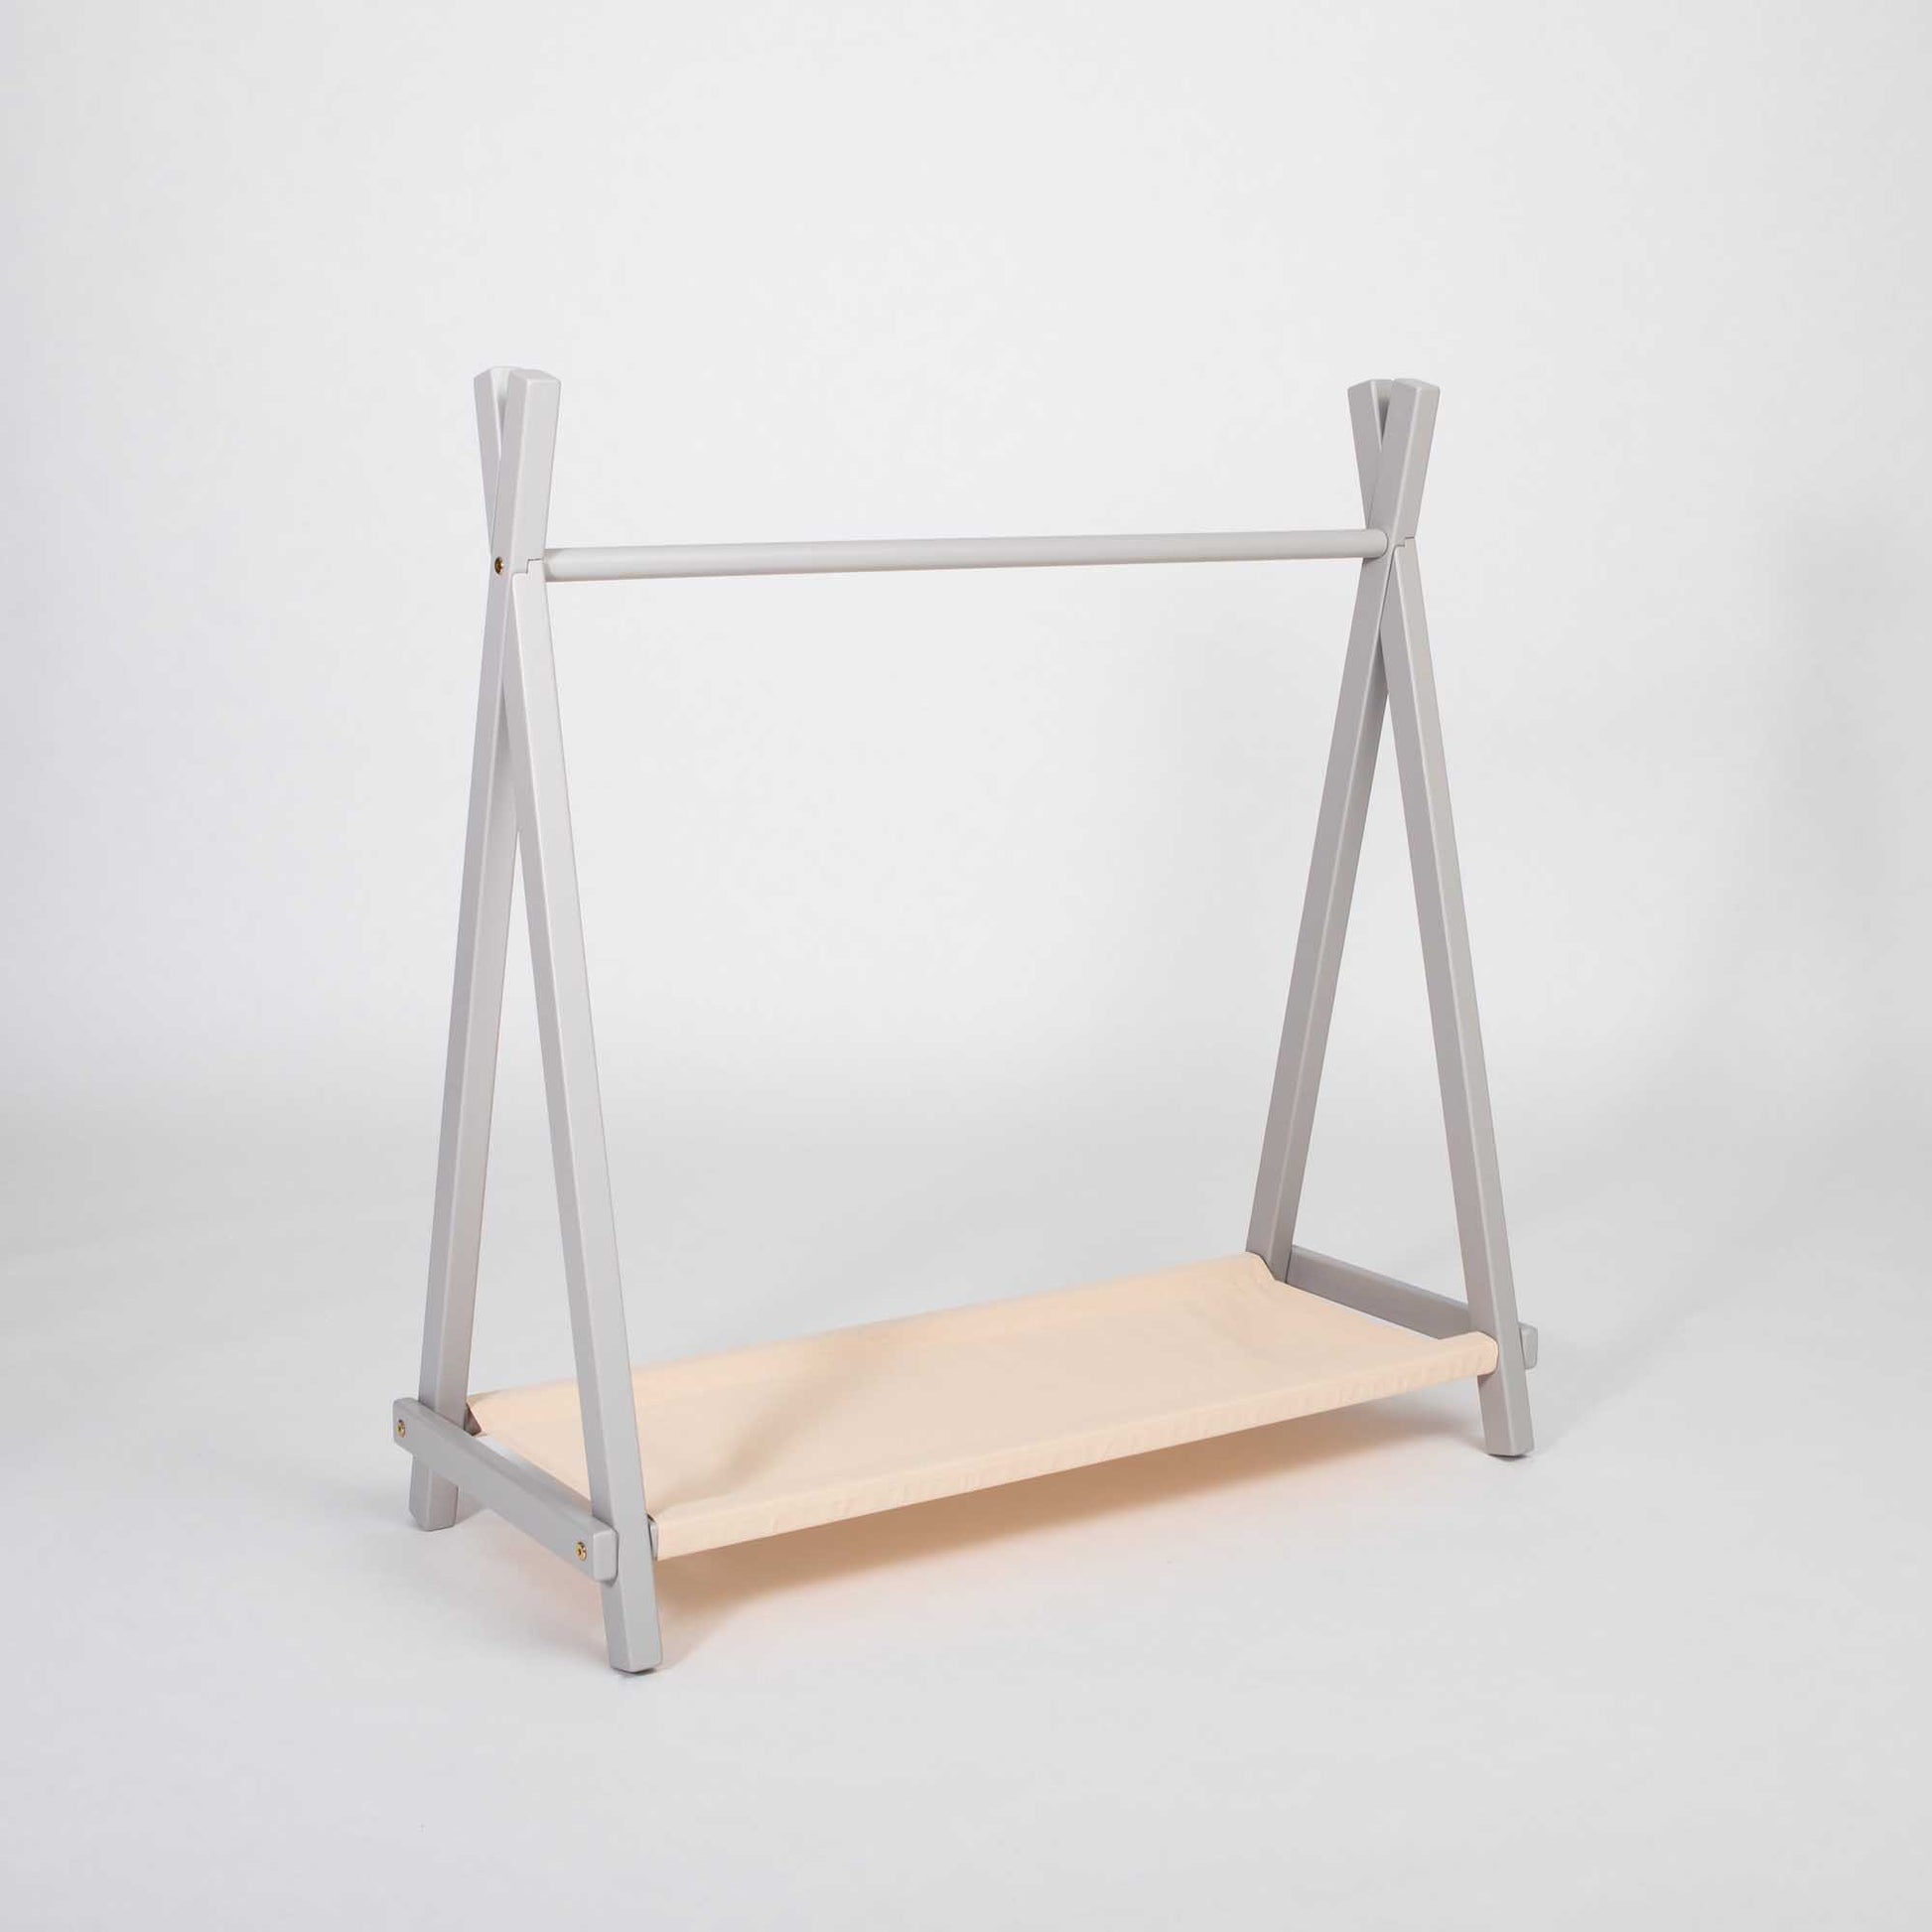 A Montessori-inspired Kids' clothing rack with storage featuring a shelf for convenient storage in a bedroom.